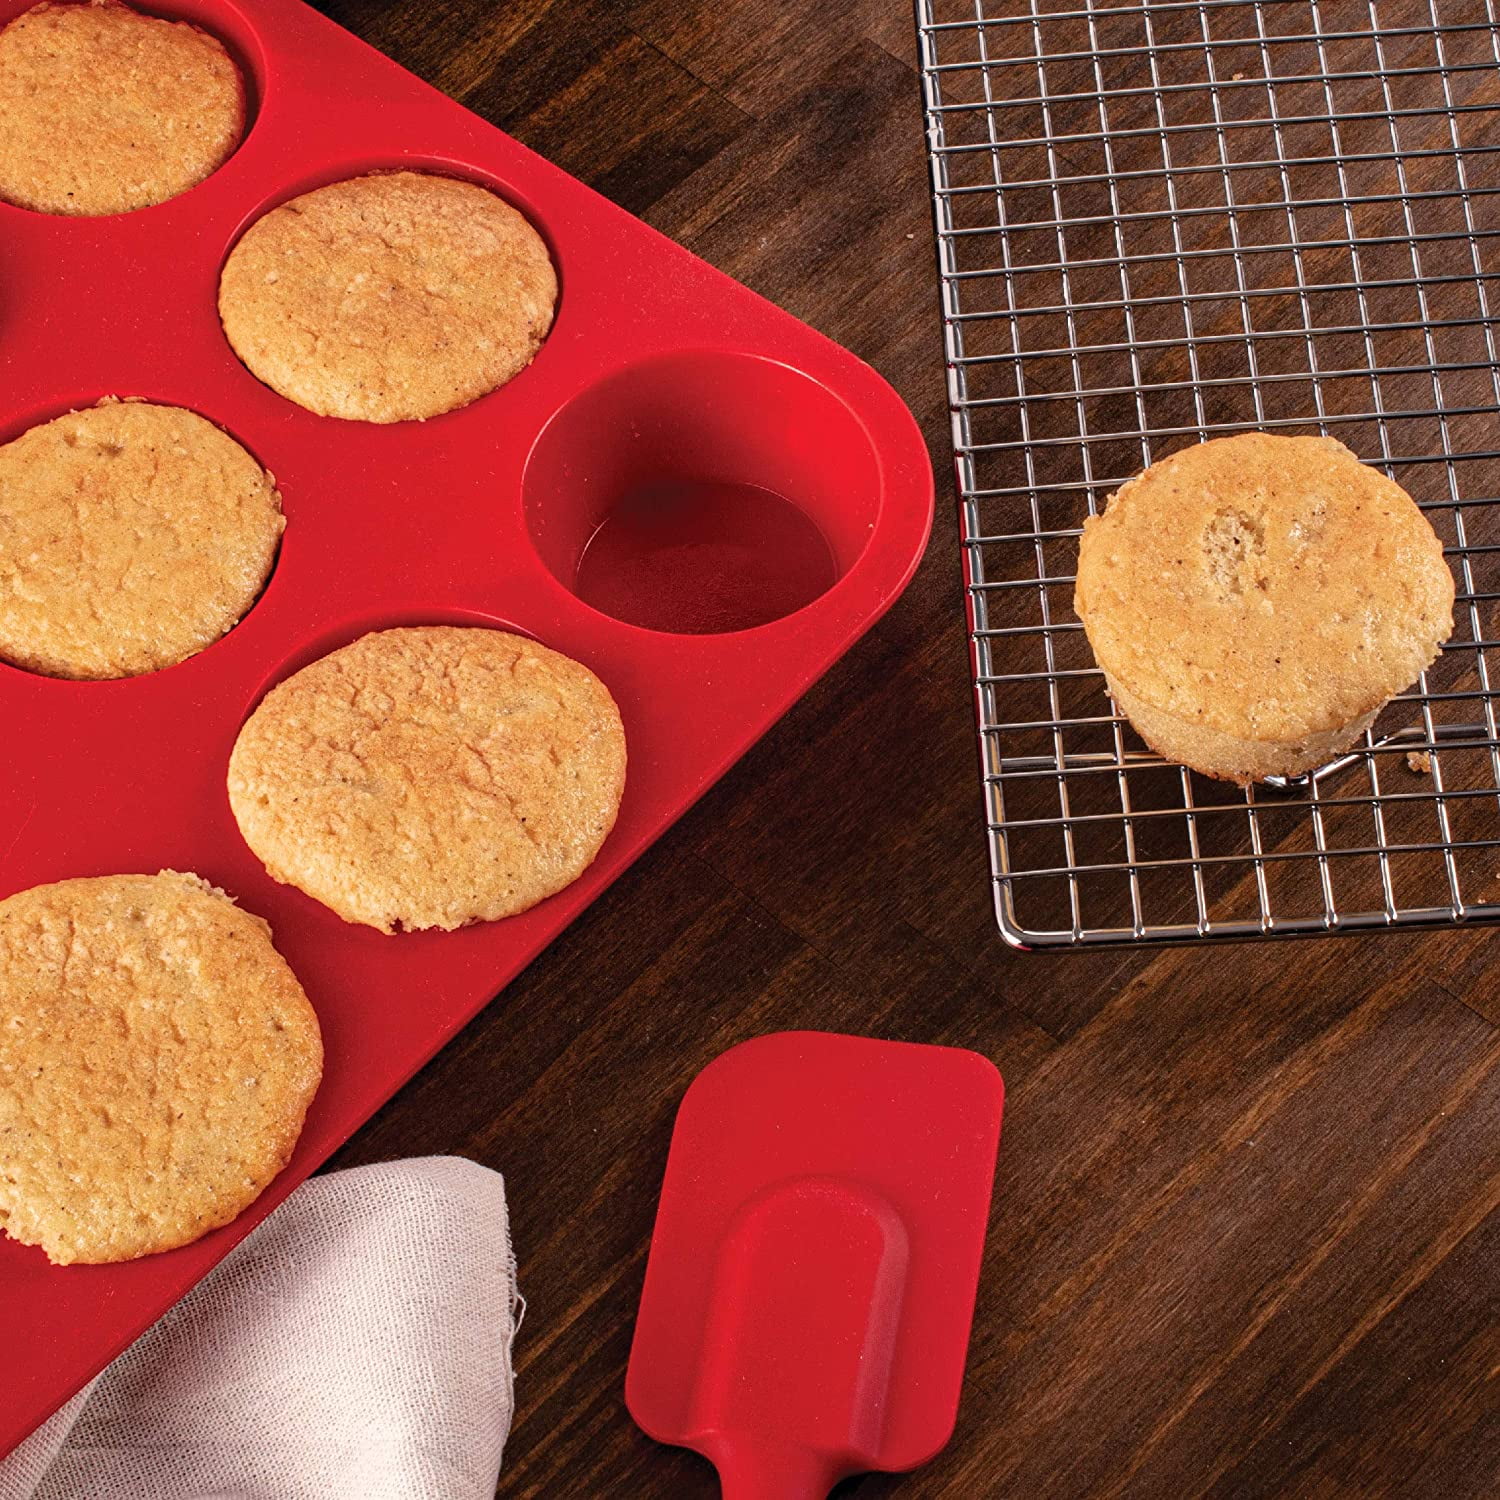 GOURMEO 12 Silicone Muffin Pan - Nonstick Baking Pans for English Muffins -  Baking Tin Tray with Cupcake Cups